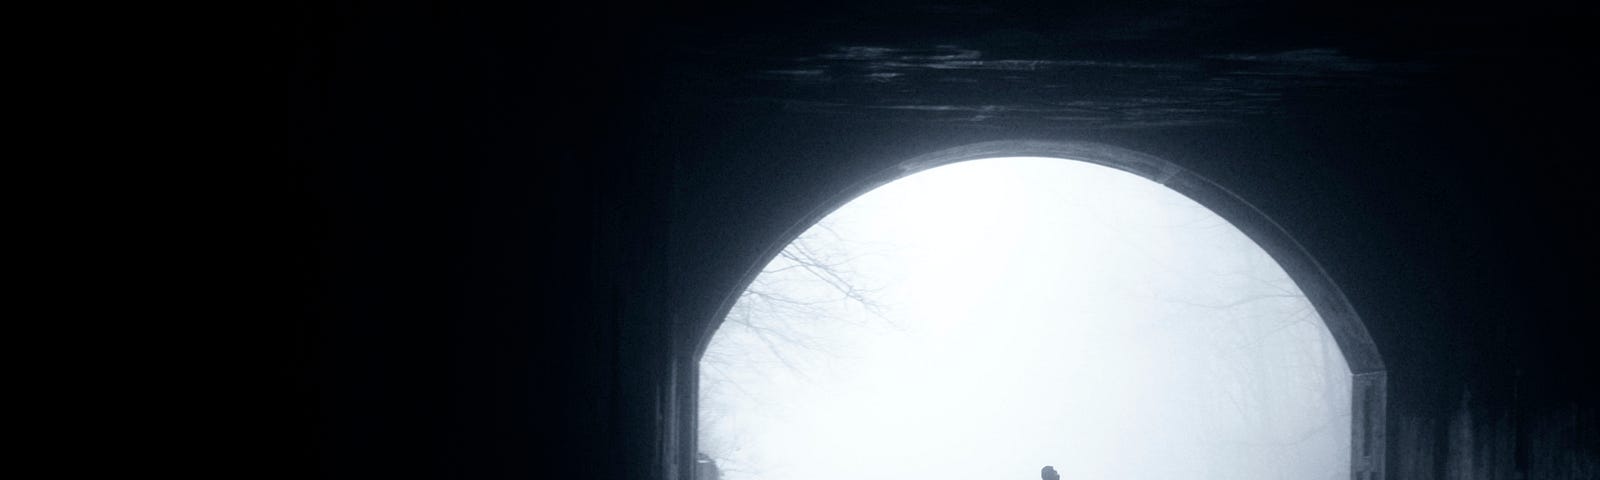 Black and white photo of a figure entering a dark tunnel.